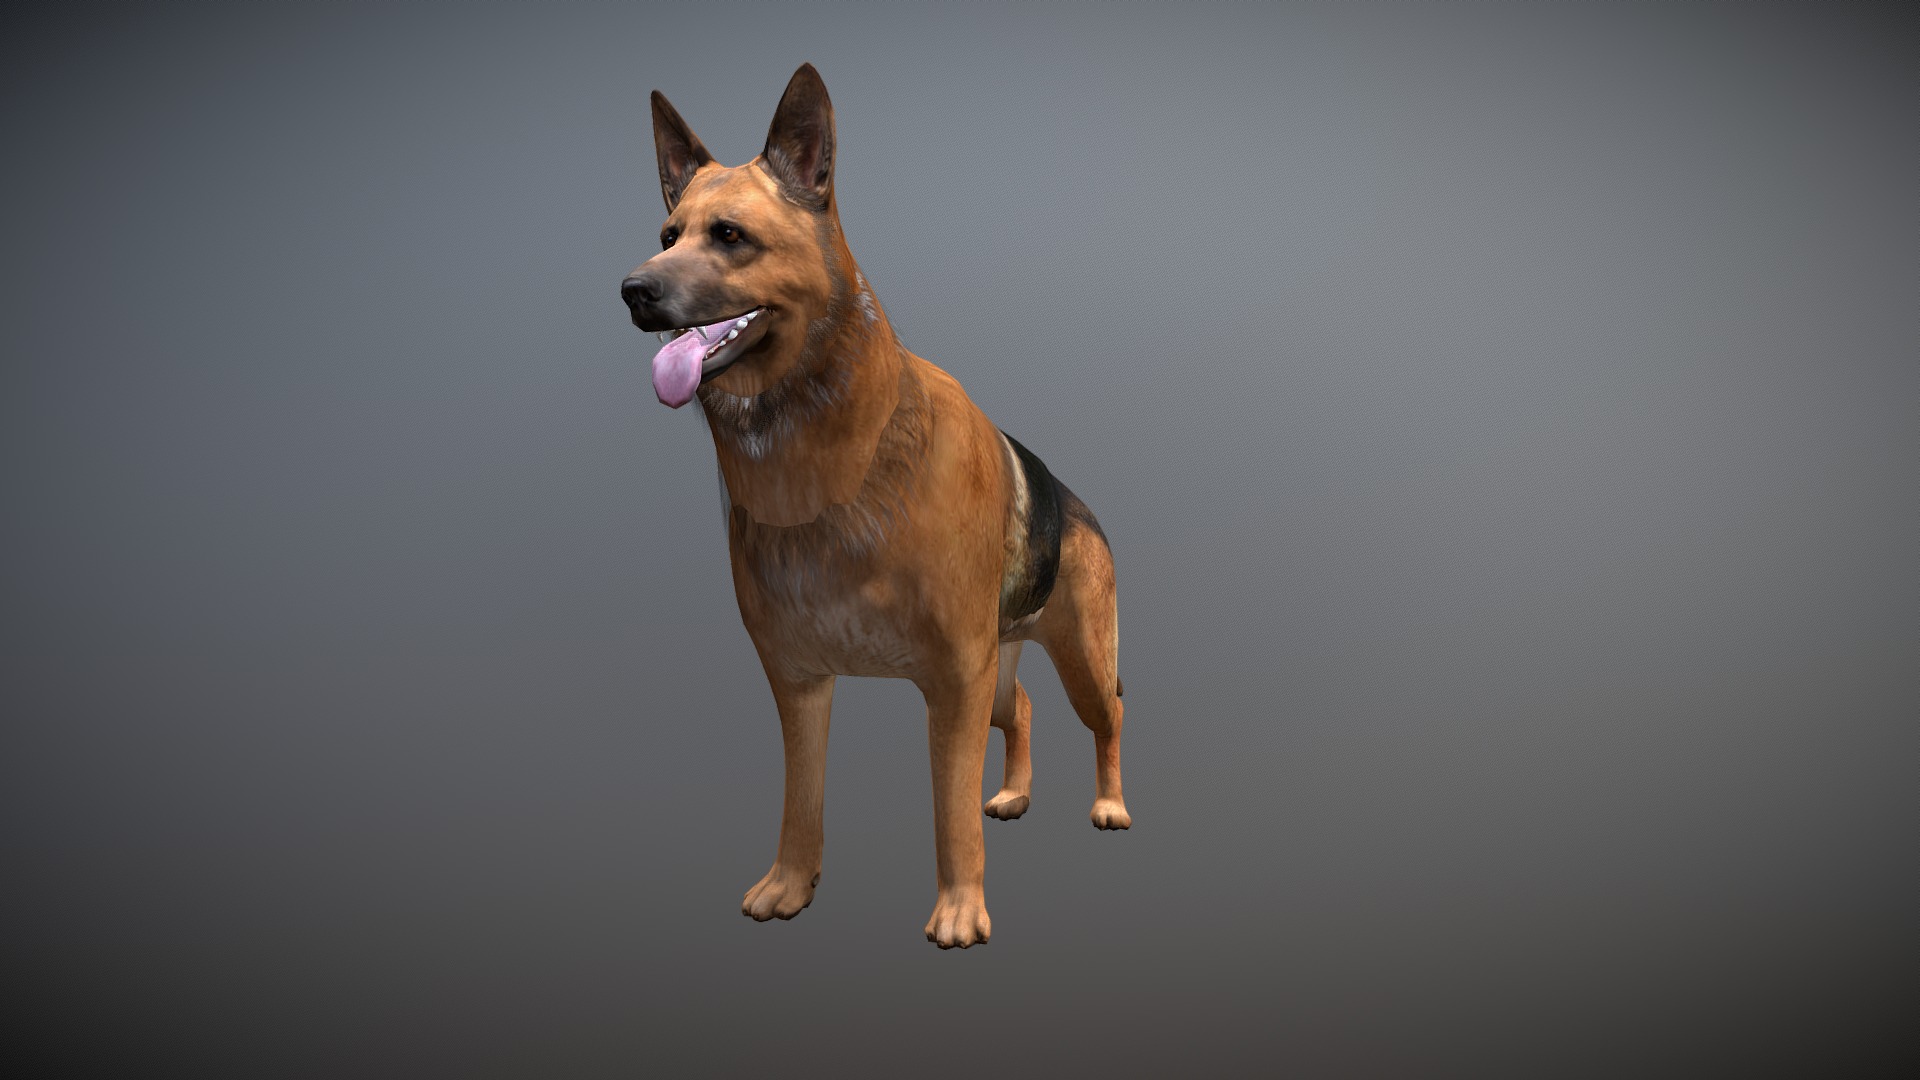 Low poly Dog 3d model for games and unity - Dog - 3D model by starkstefen 3d model